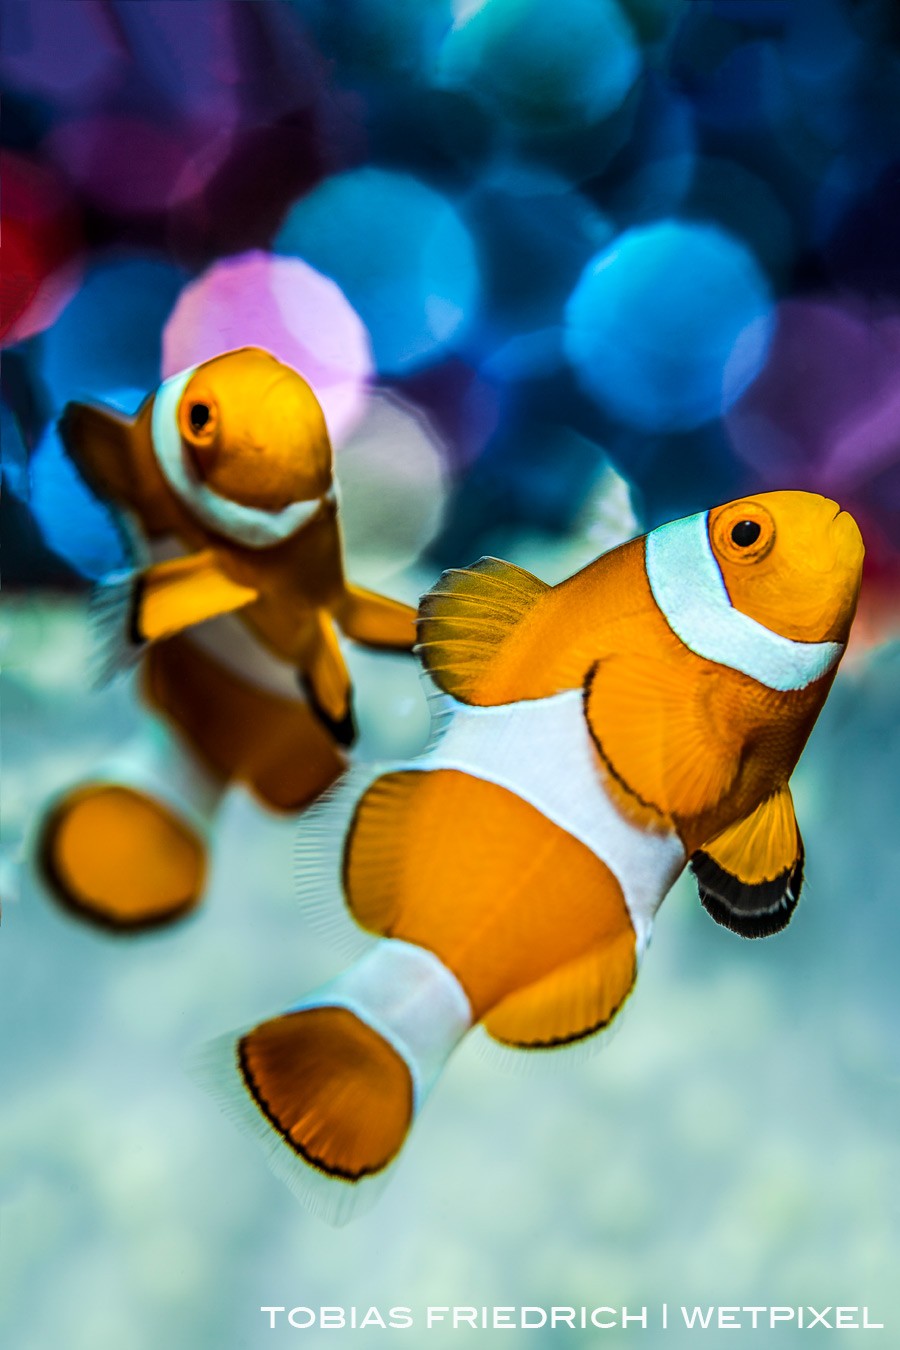 A pair of clownfish (*Amphiprion ocellaris*) with bubble bokeh background